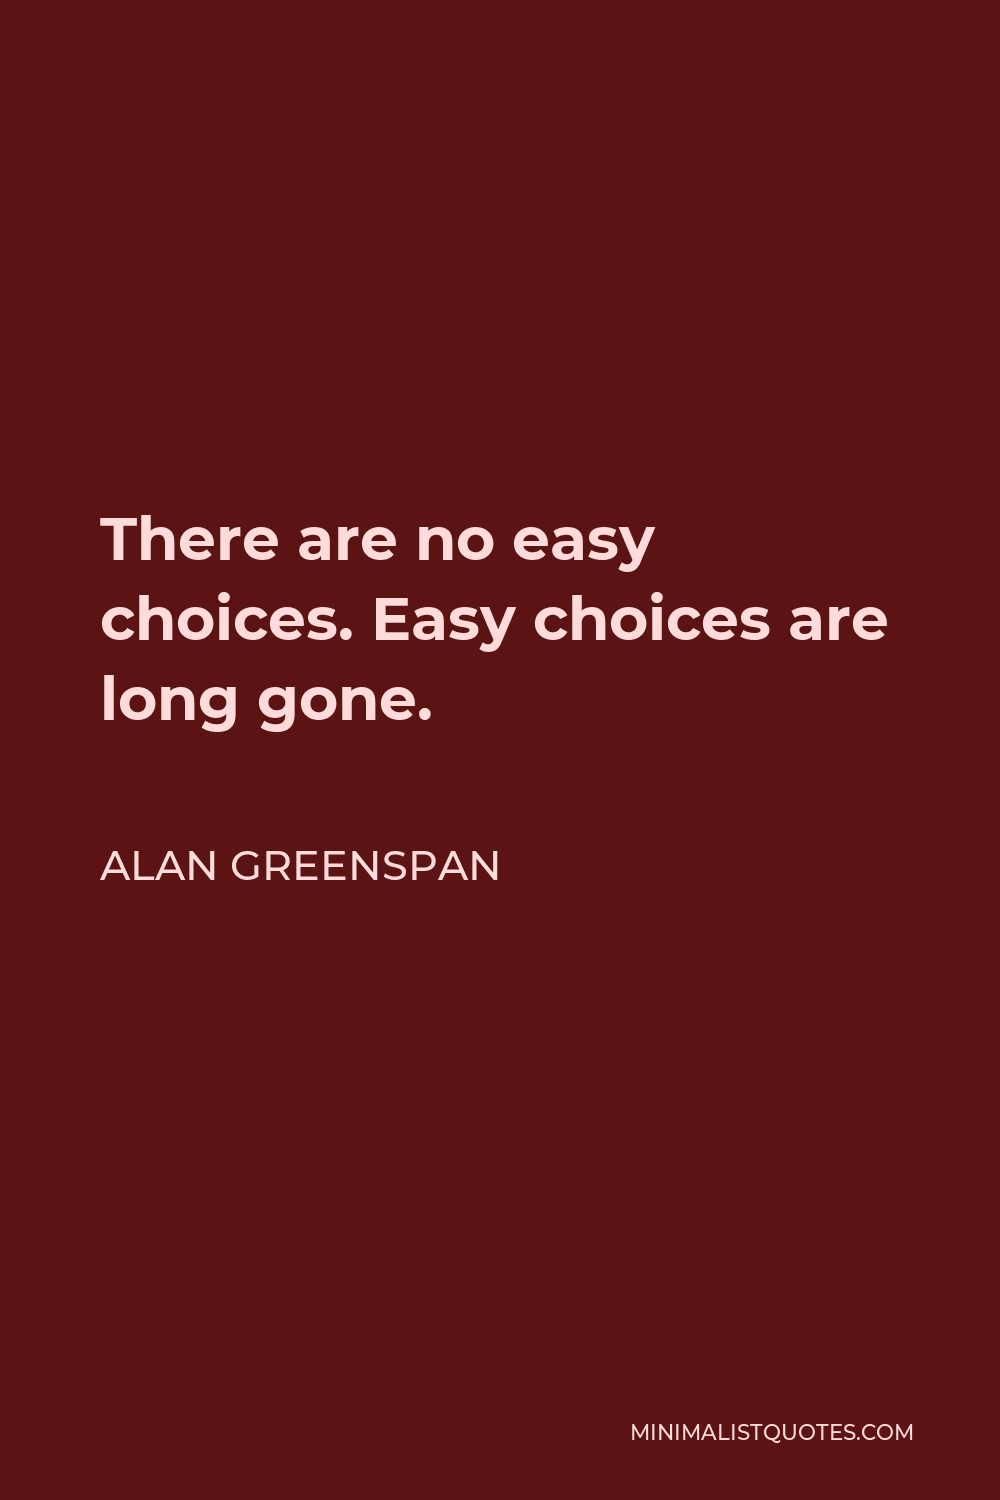 Alan Greenspan Quote - There are no easy choices. Easy choices are long gone.